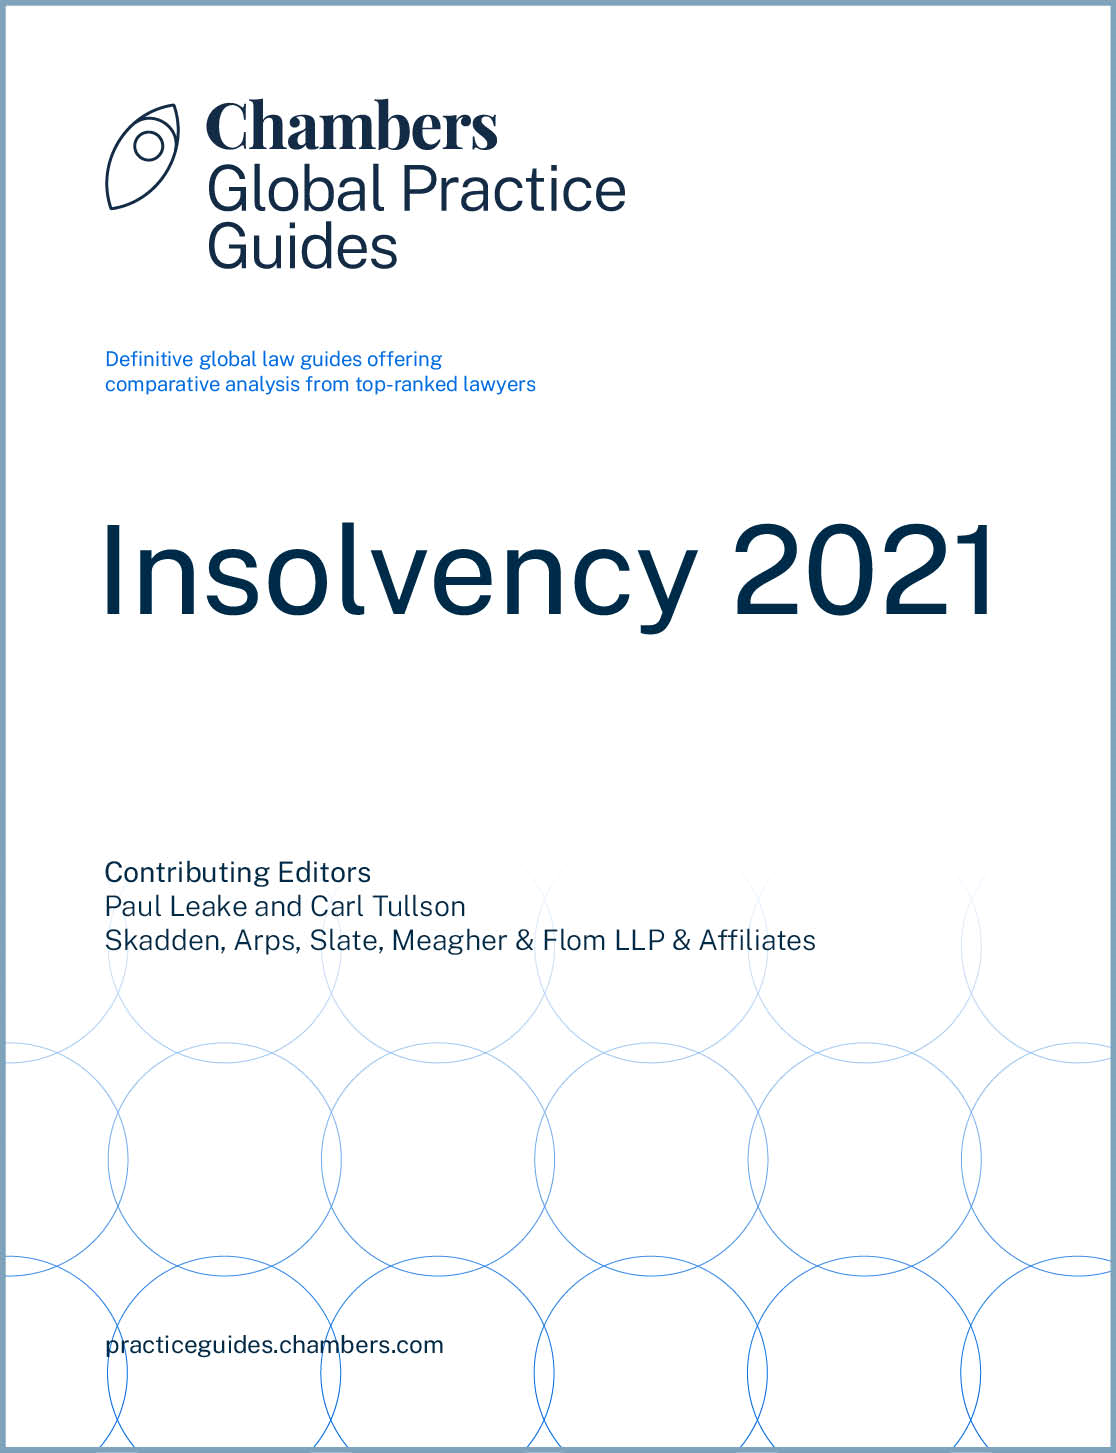 You are currently viewing Shalakany is delighted to share its contribution to the latest edition of the Chambers Insolvency Global Practice Guide